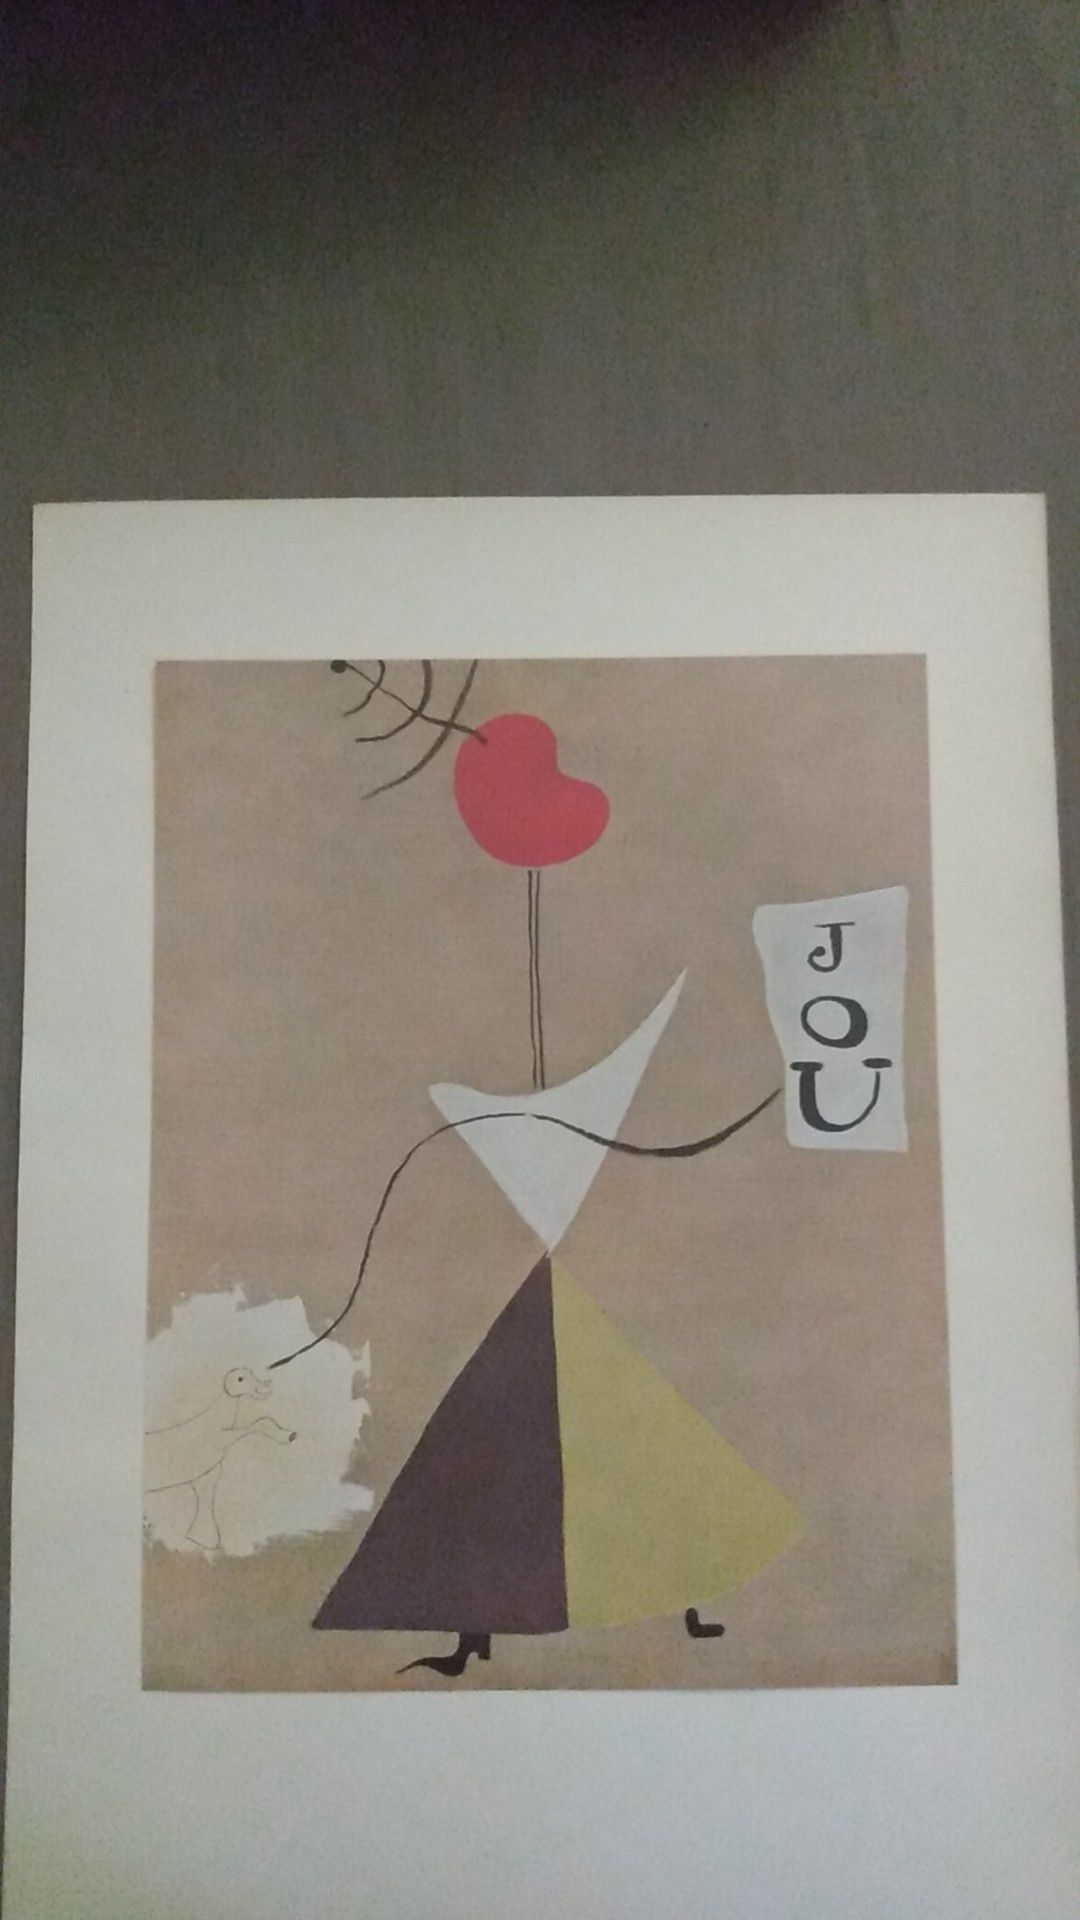 Joan Miro 1940 s lithograph of the painting "Woman, Newspaper, Dog